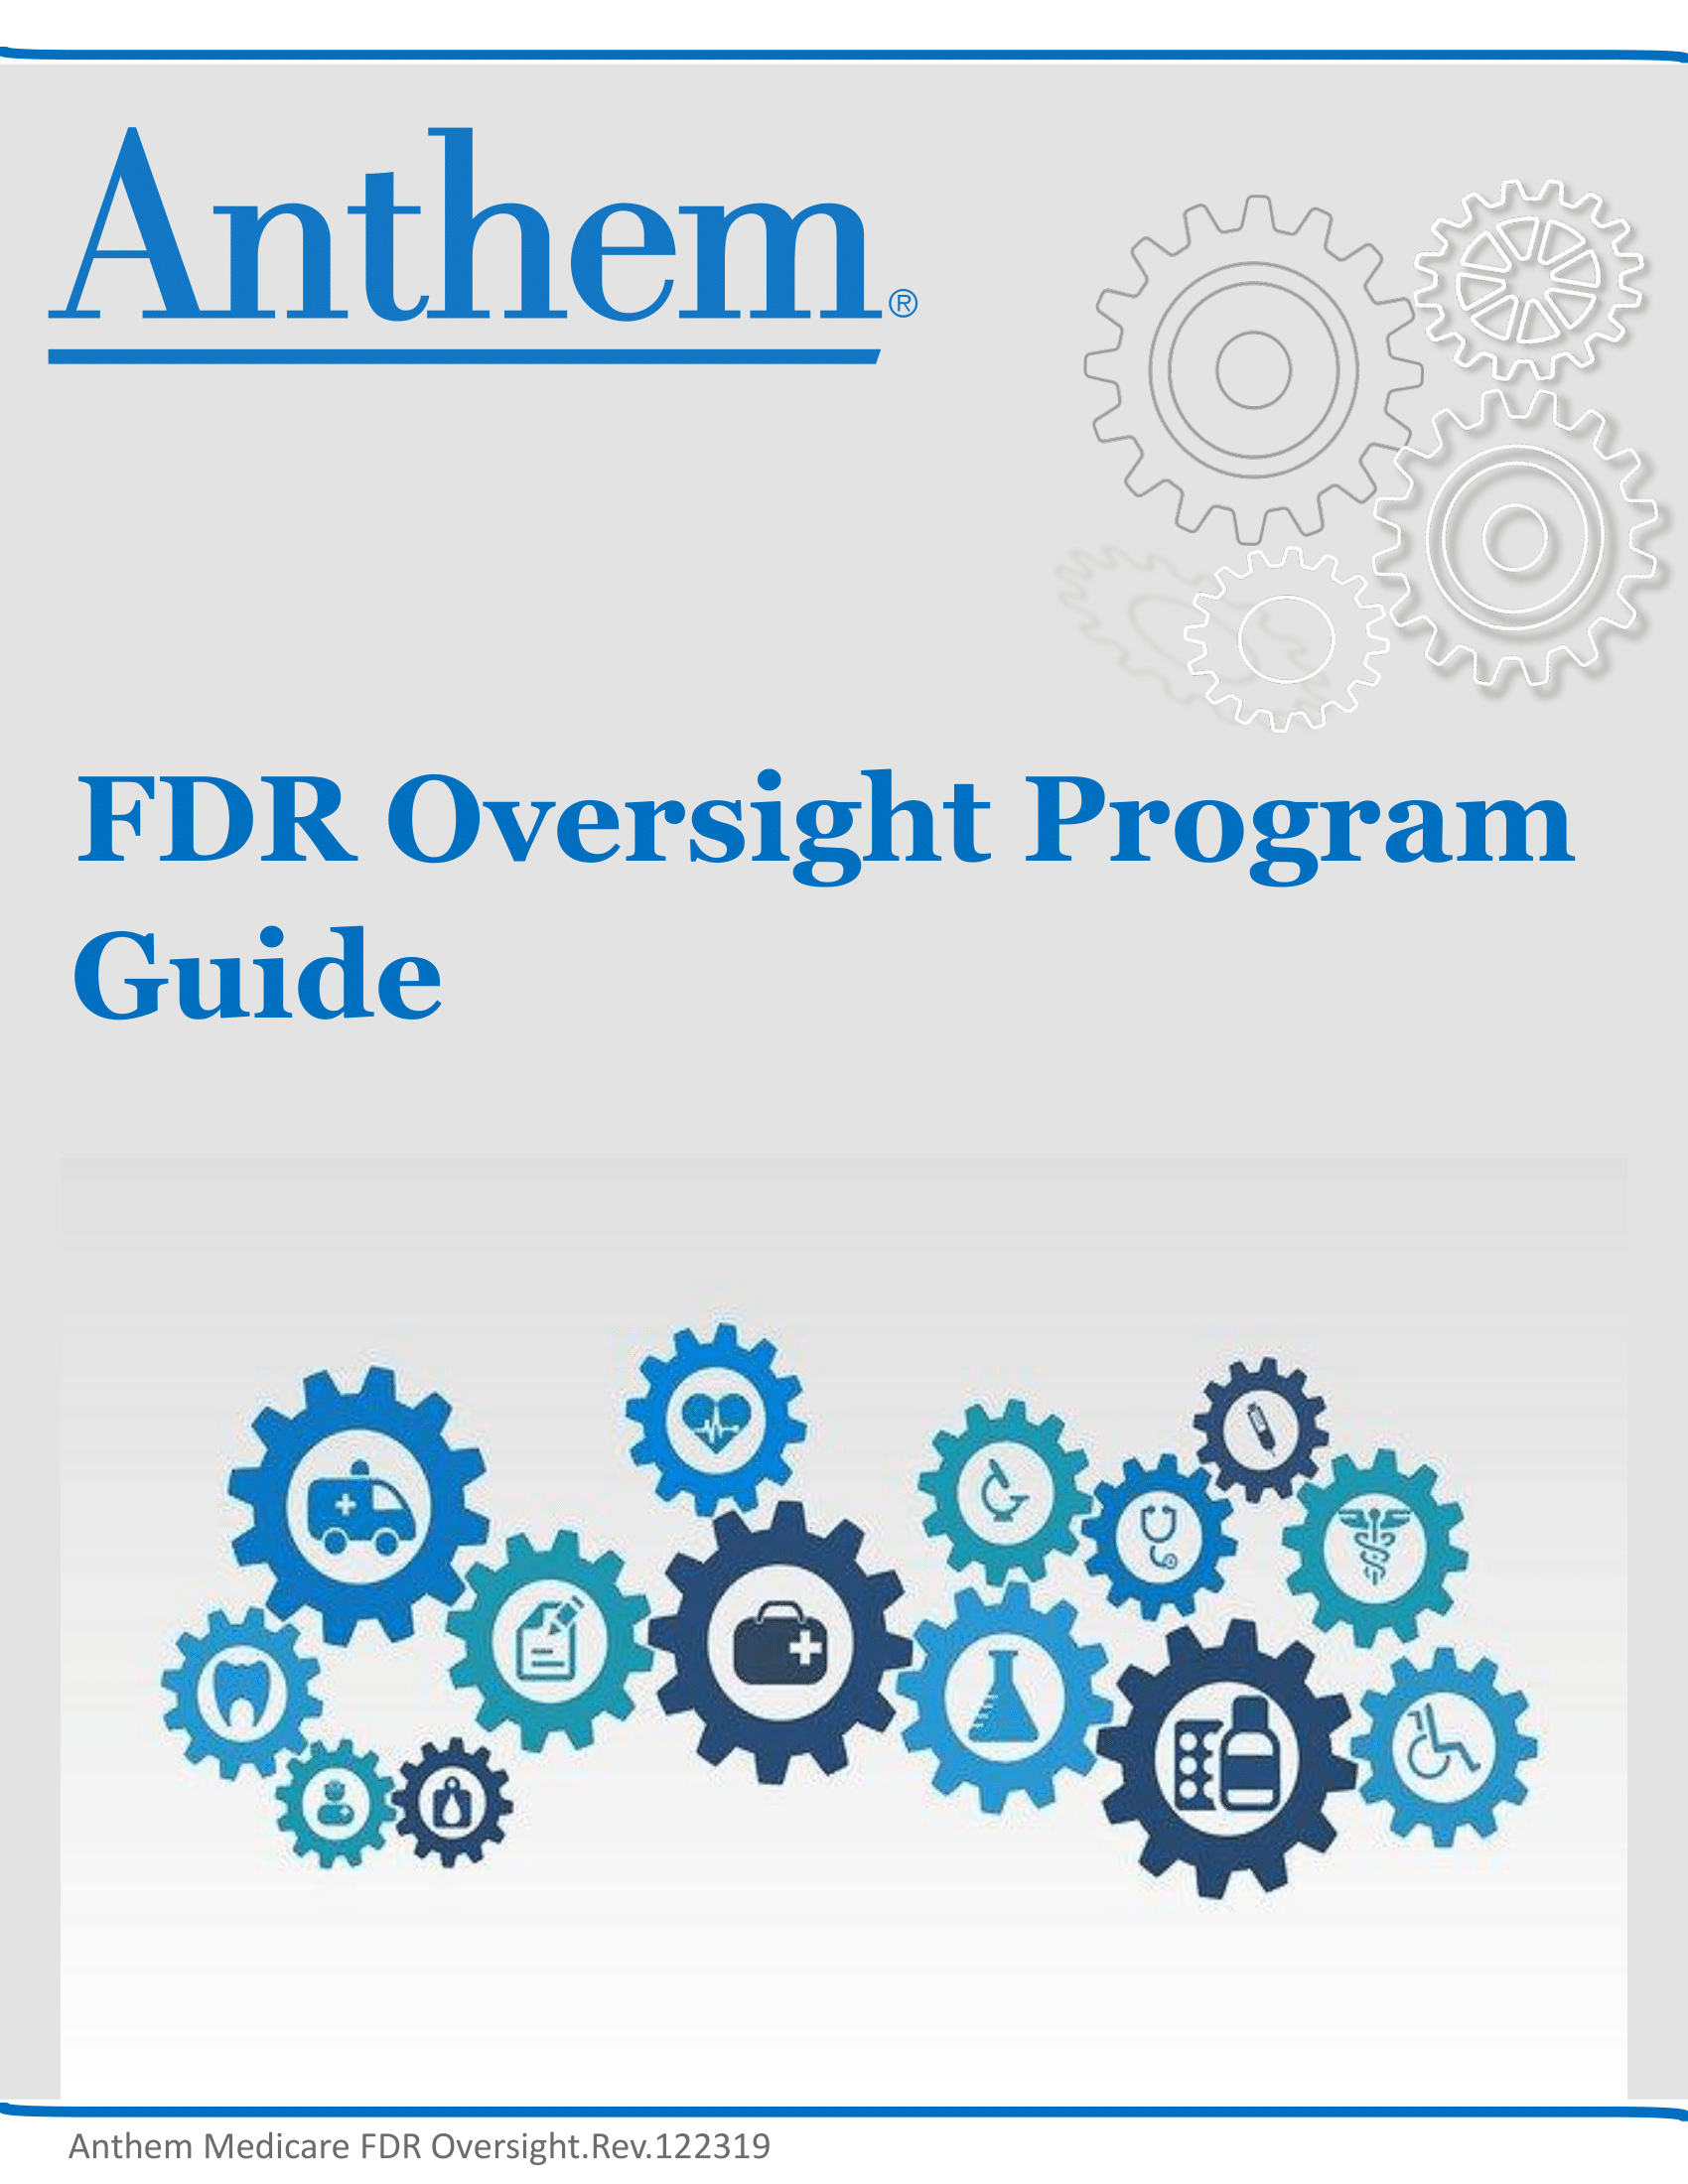 3 2020 Anthem FDR Oversight Tools You Can Use